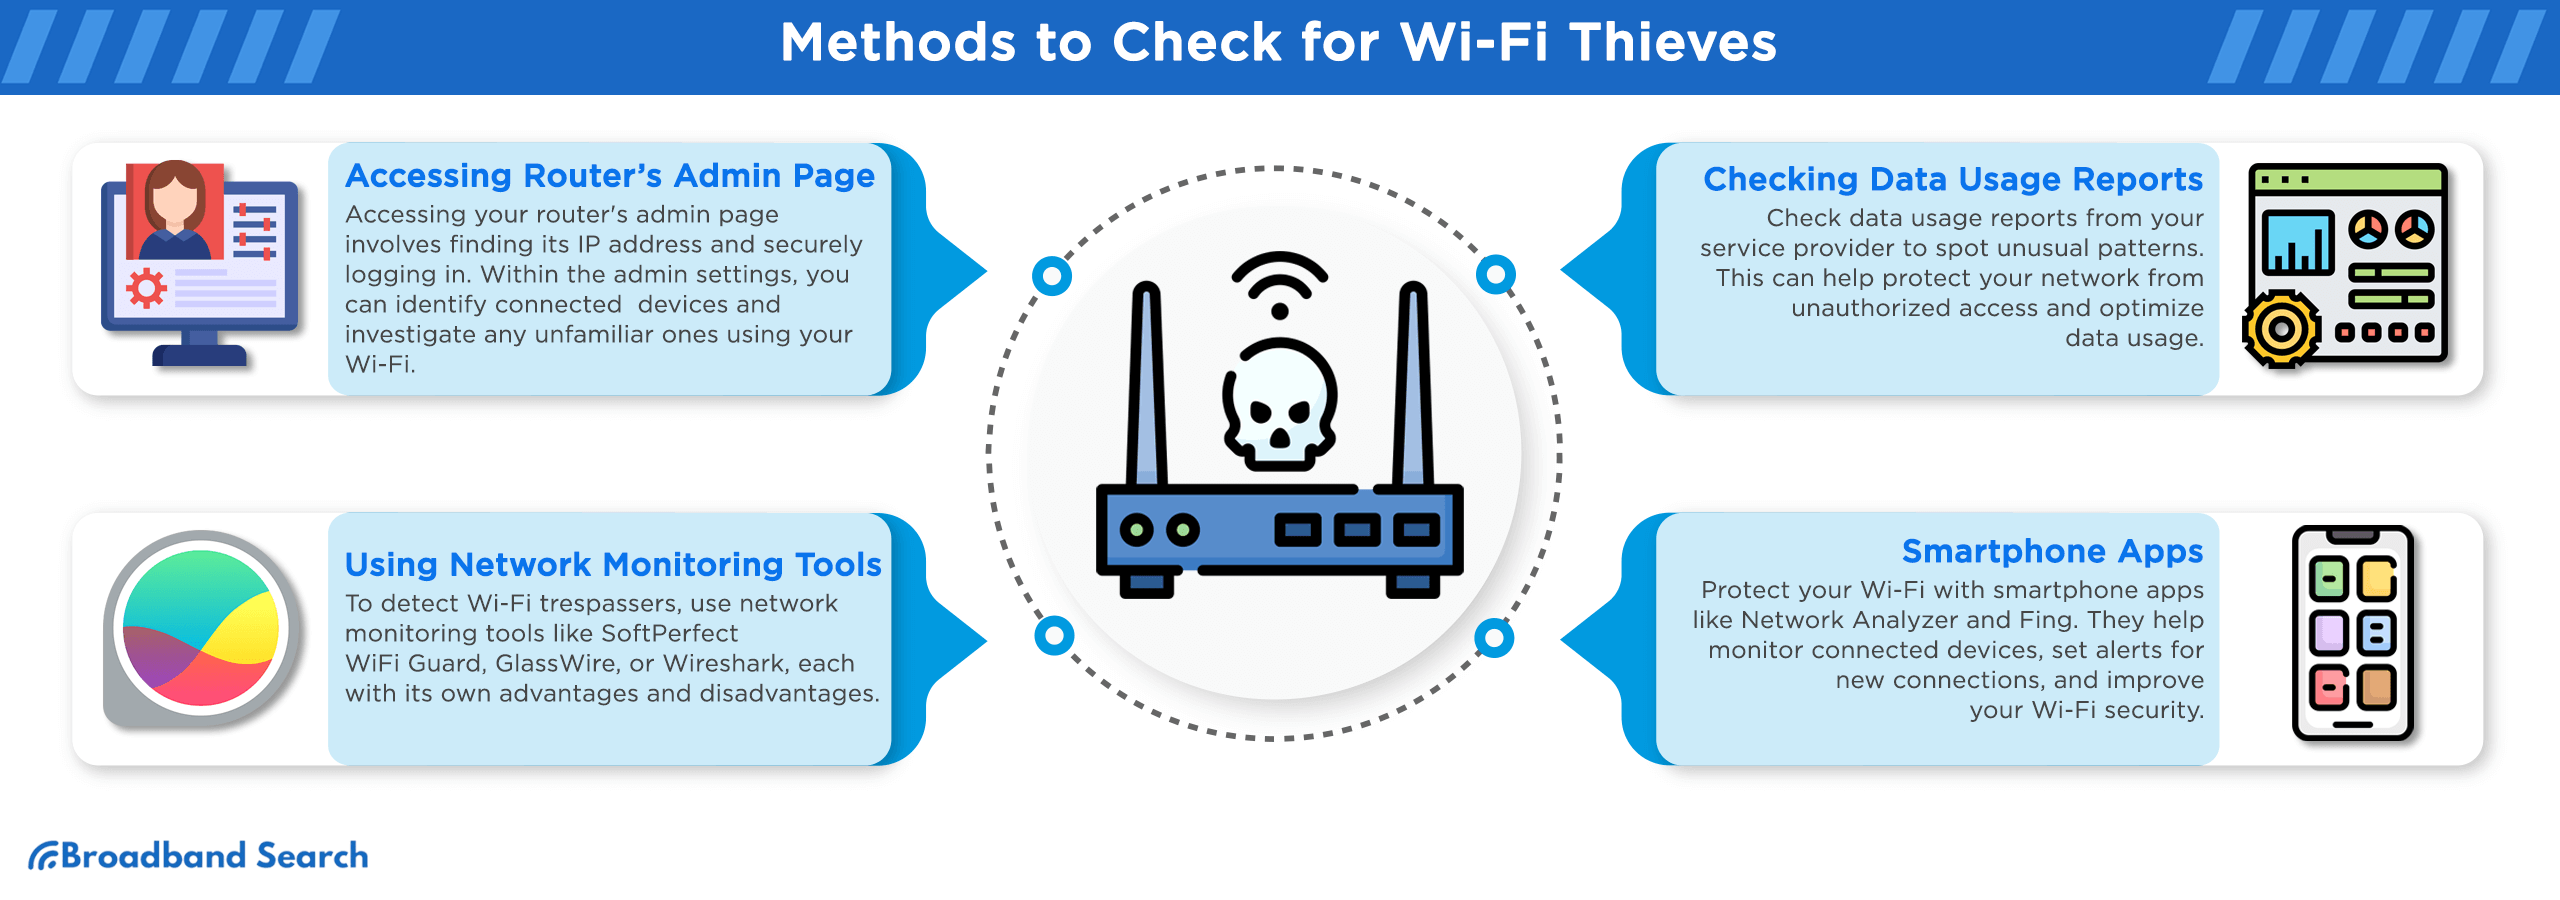 Methods to check for wi-fi thieves